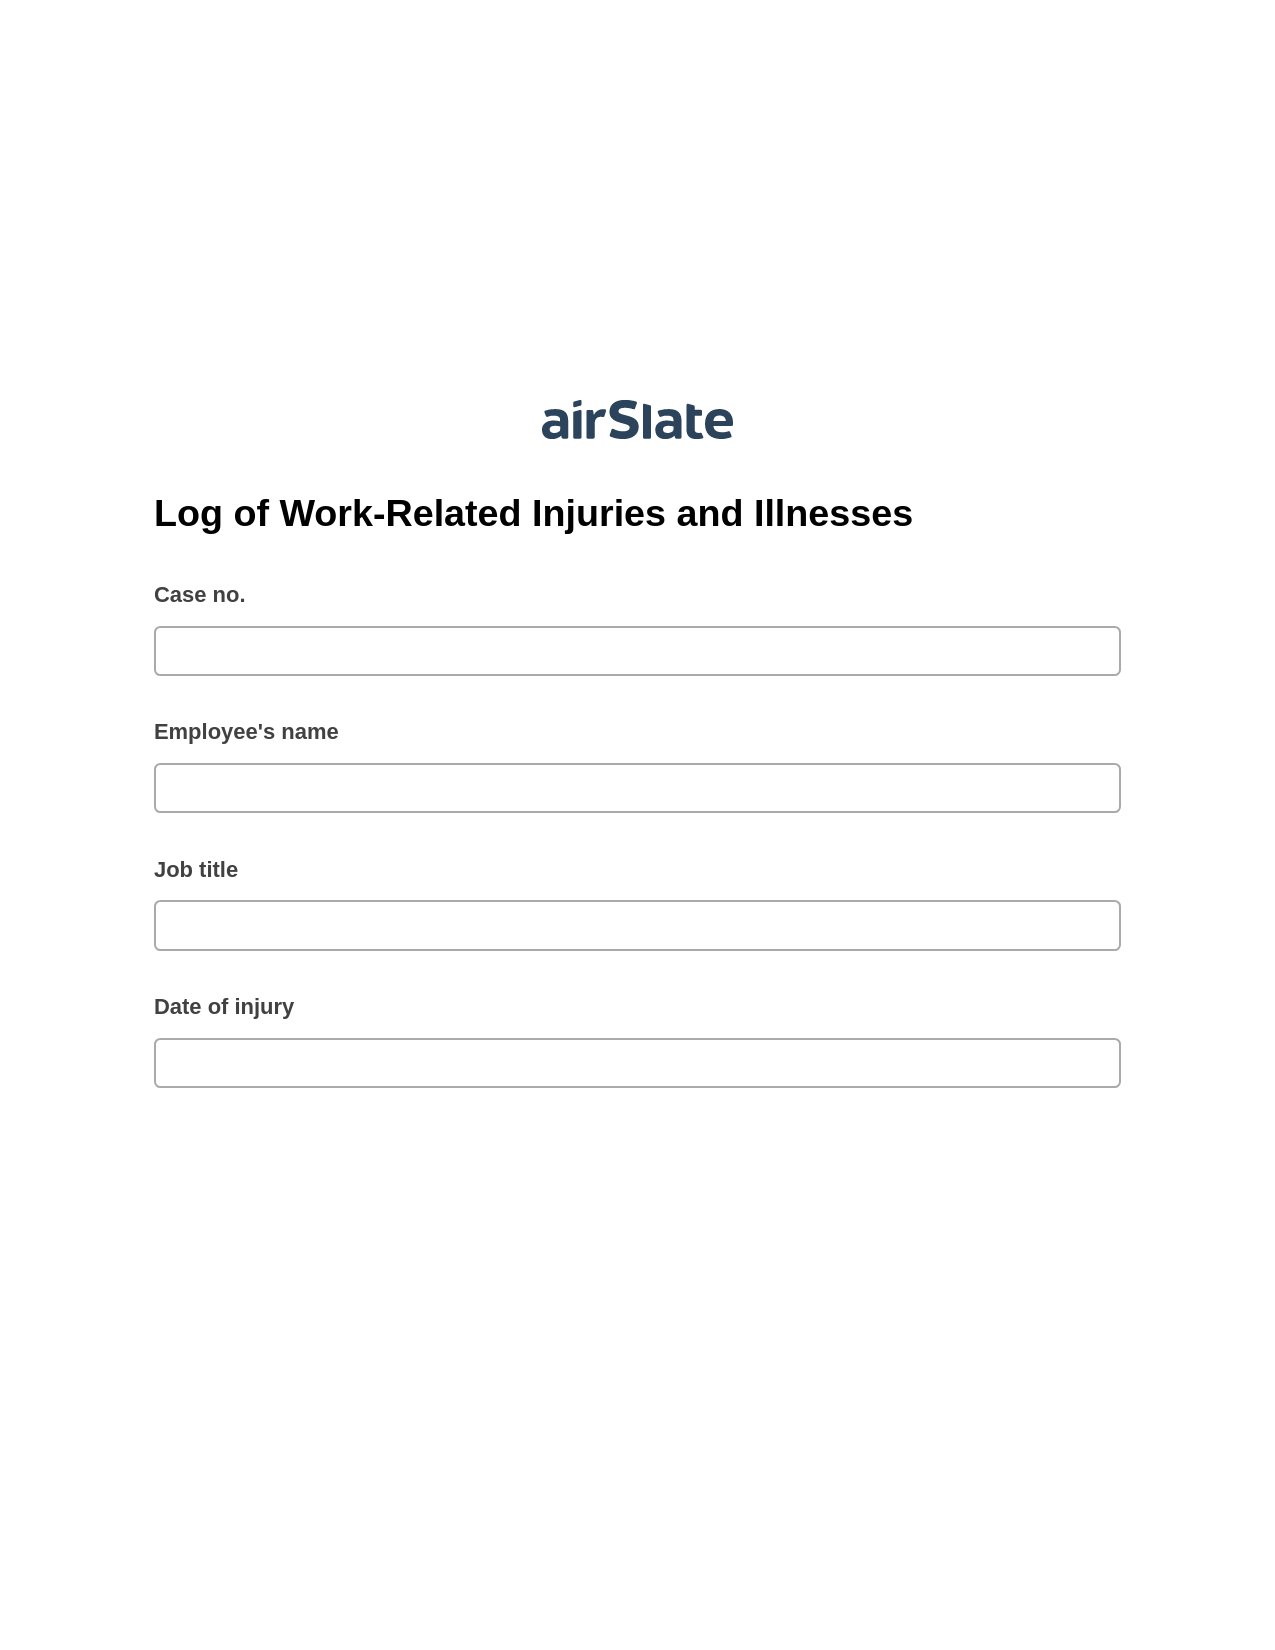 Multirole Log of Work-Related Injuries and Illnesses Pre-fill Slate from MS Dynamics 365 Records Bot, Update Salesforce Record Bot, OneDrive Bot